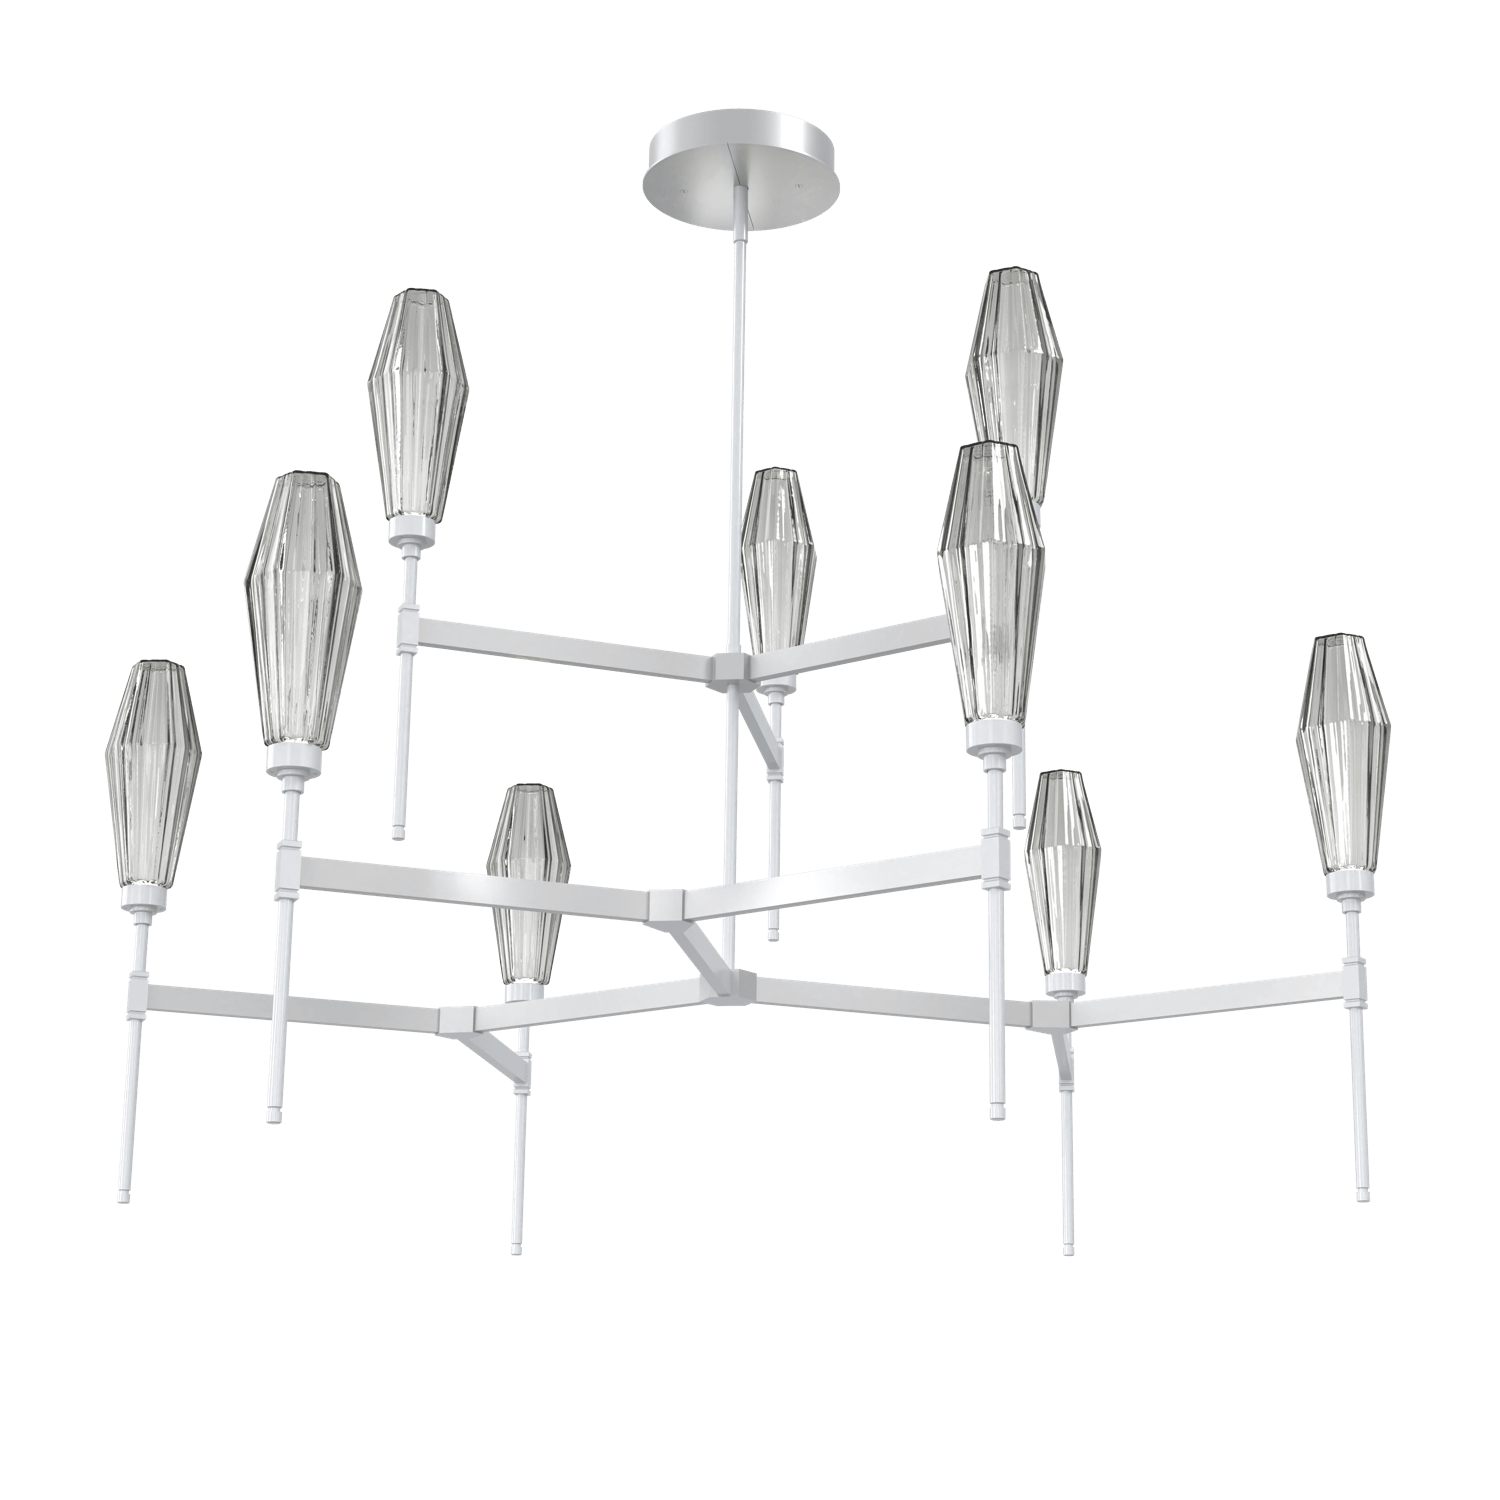 CHB0049-54-CS-RS-Hammerton-Studio-Aalto-54-inch-round-two-tier-belvedere-chandelier-with-classic-silver-finish-and-optic-ribbed-smoke-glass-shades-and-LED-lamping